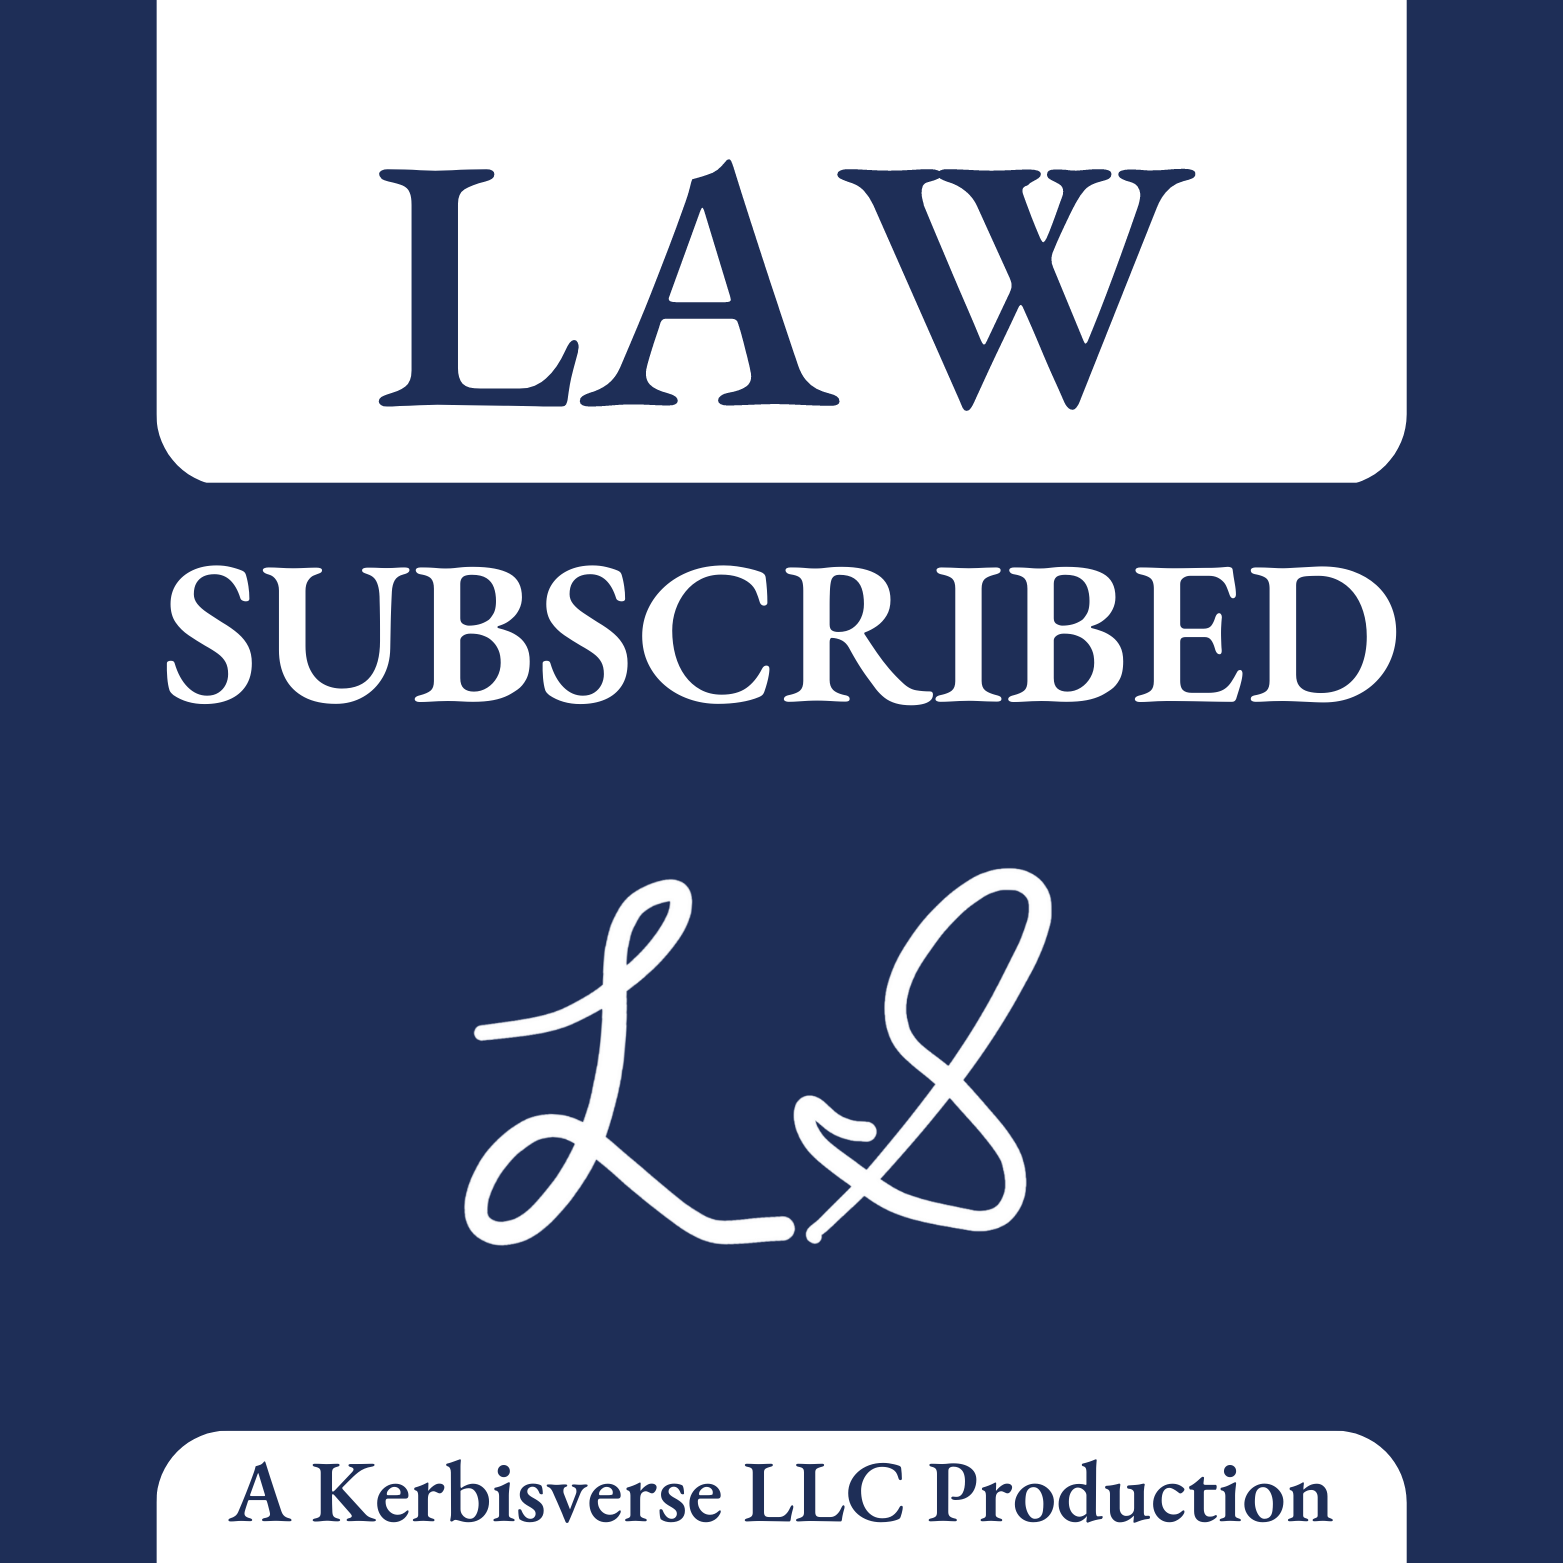 (60) Tax, Estate and Succession Planning + Subscriptions with Matthew Burgess of View Legal